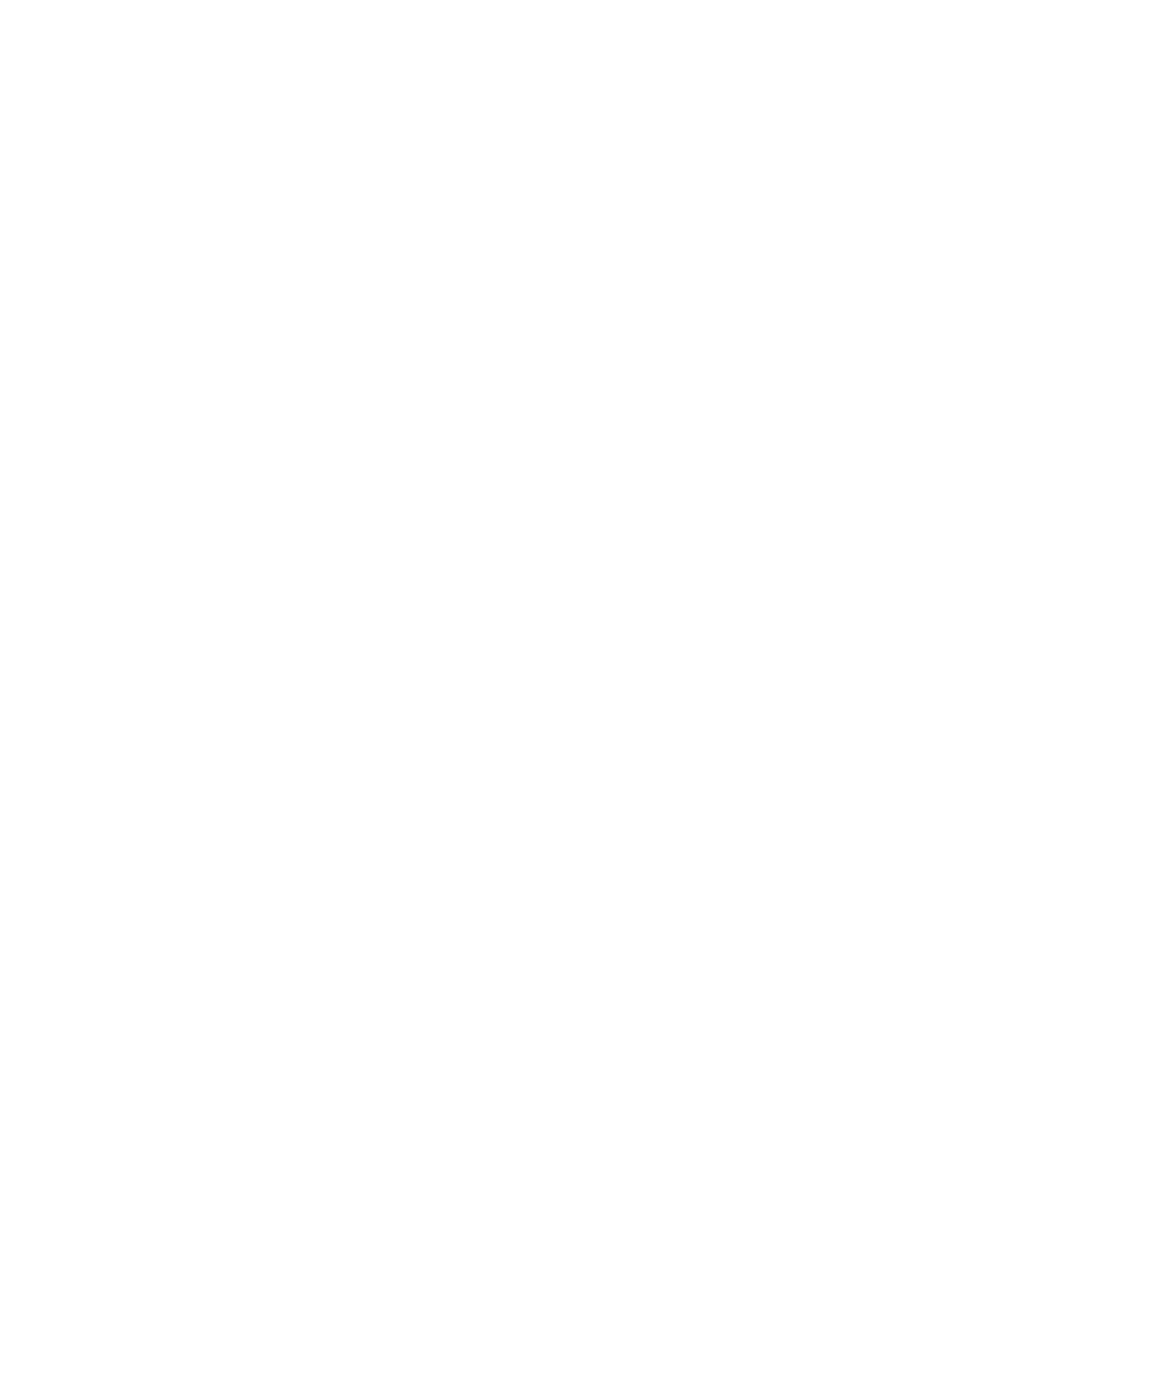 Let's Knock the World.